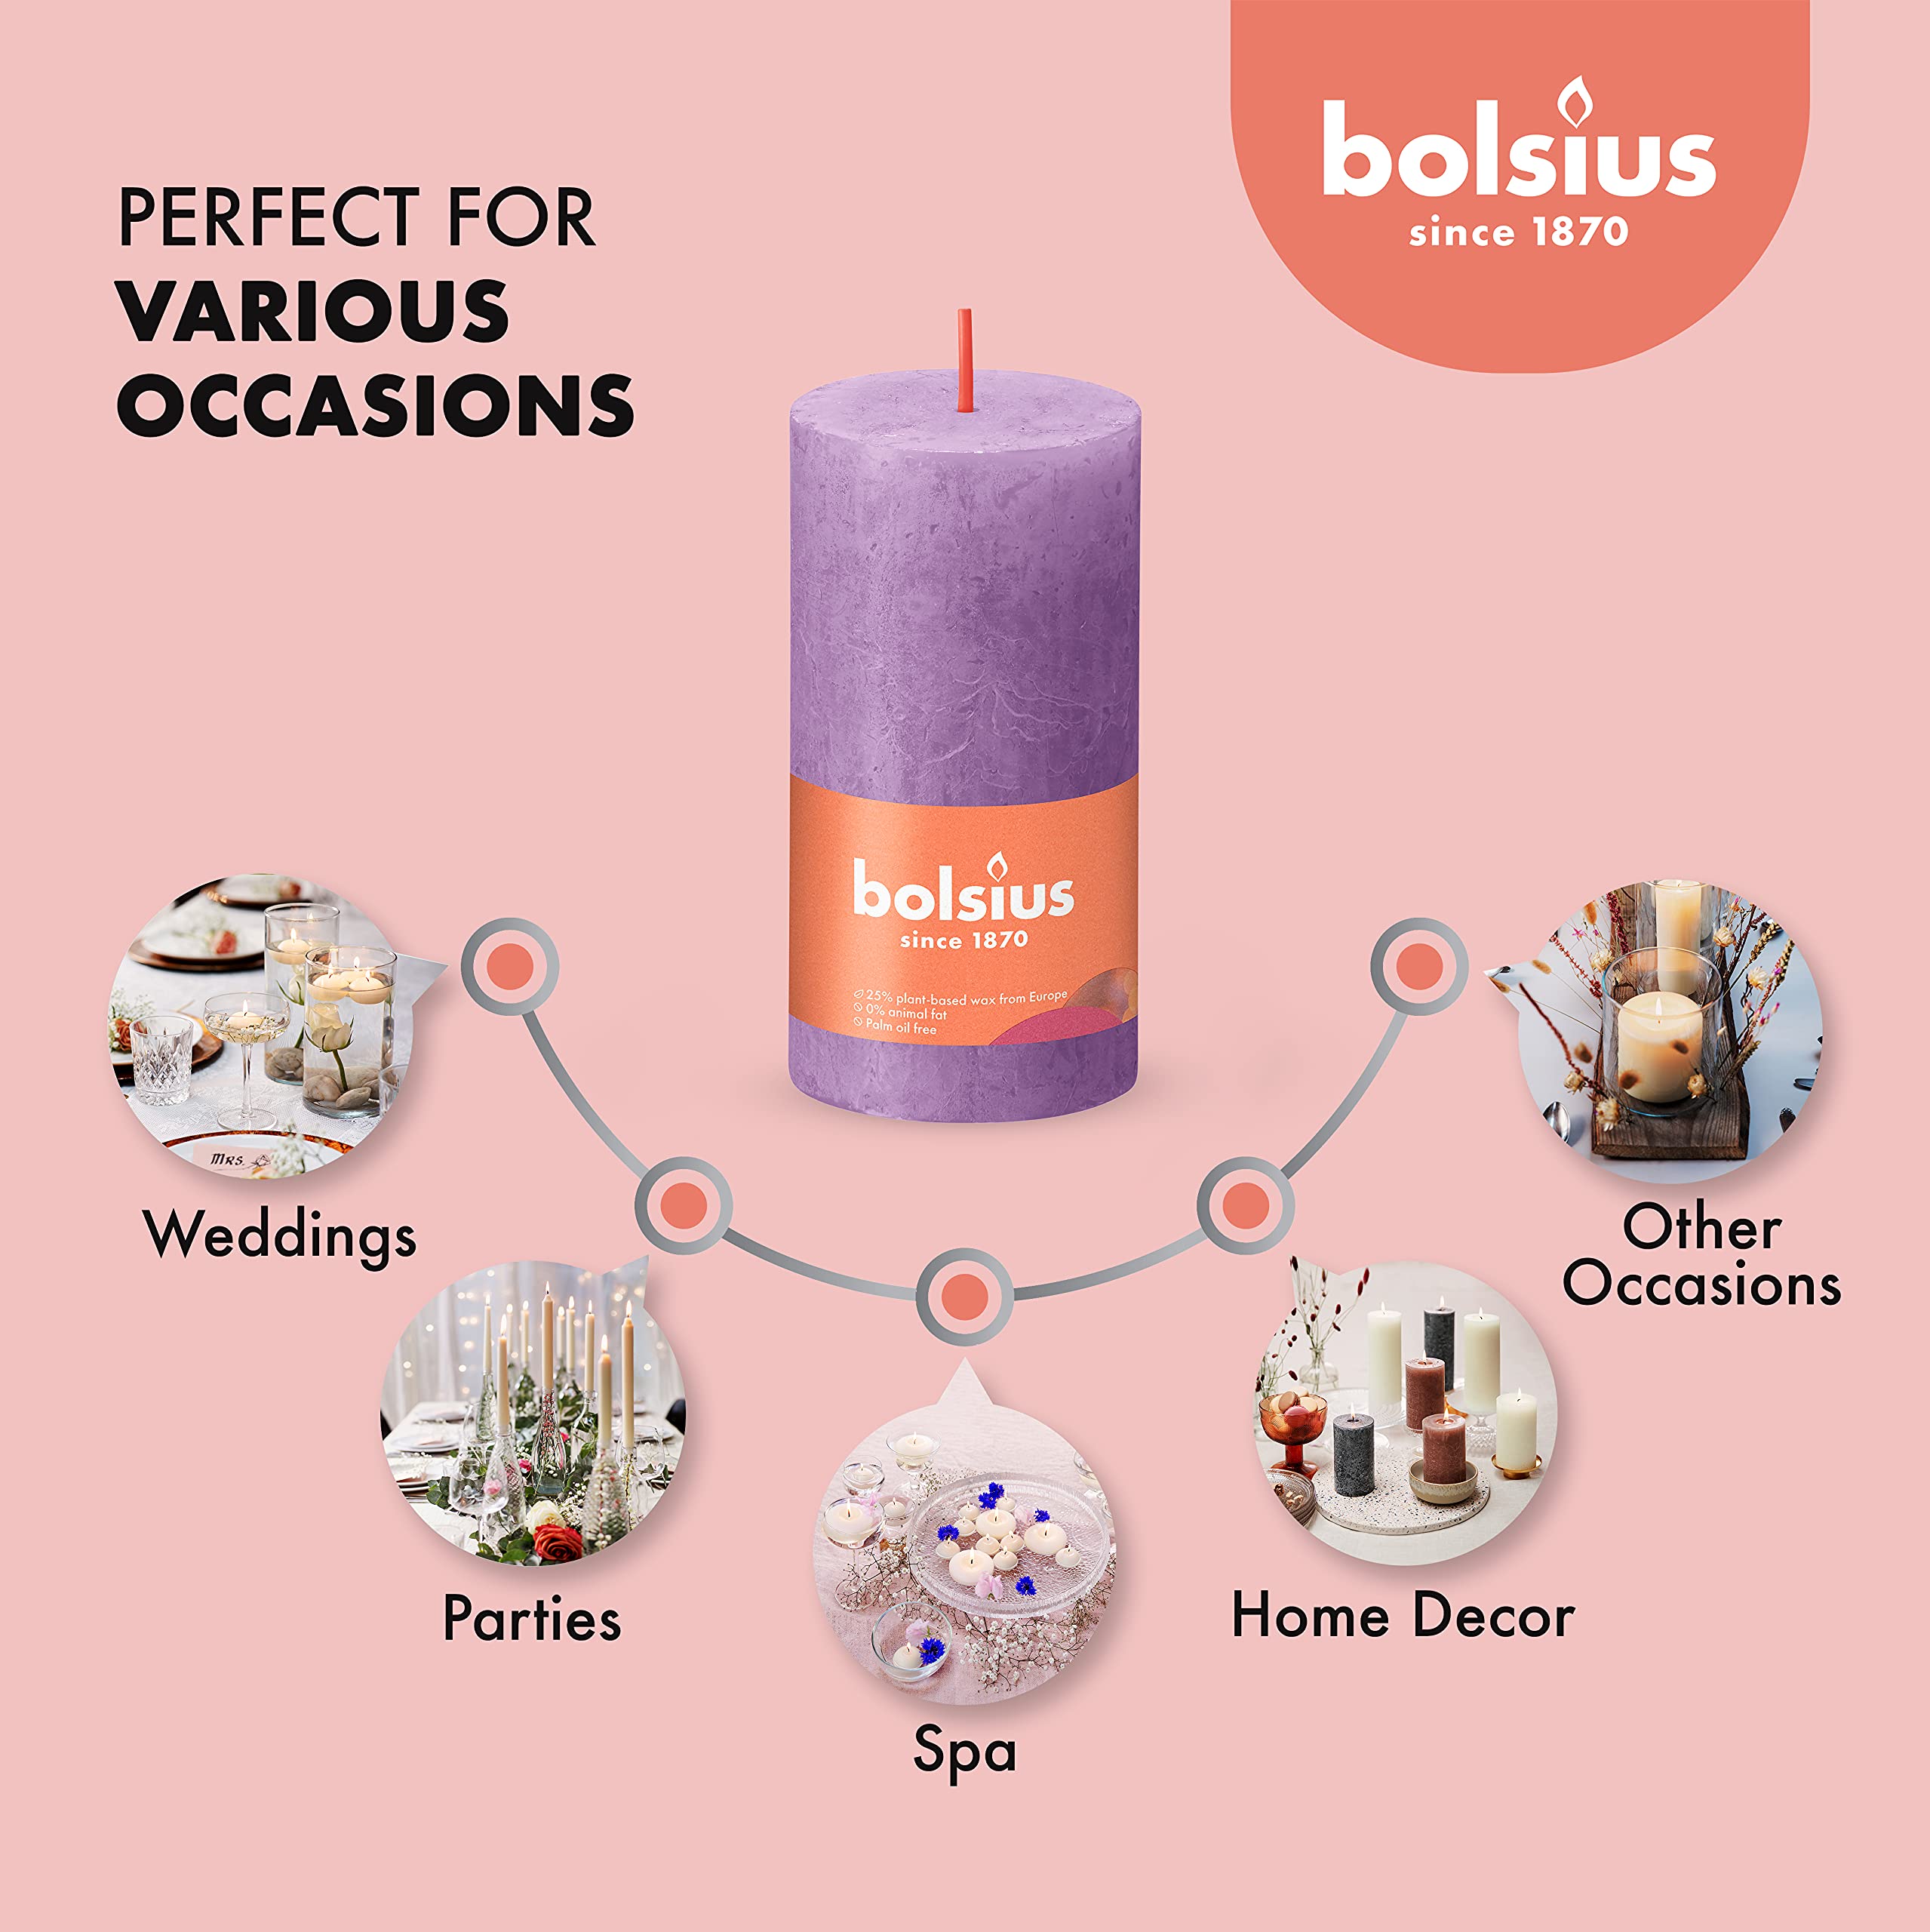 BOLSIUS 4 Pack Vibrant Violet (Purple) Rustic Pillar Candles - 2 X 4 Inches - Premium European Quality - Includes Natural Plant-Based Wax - Unscented Dripless Smokeless 30 Hour Party D�cor Candles  - Acceptable